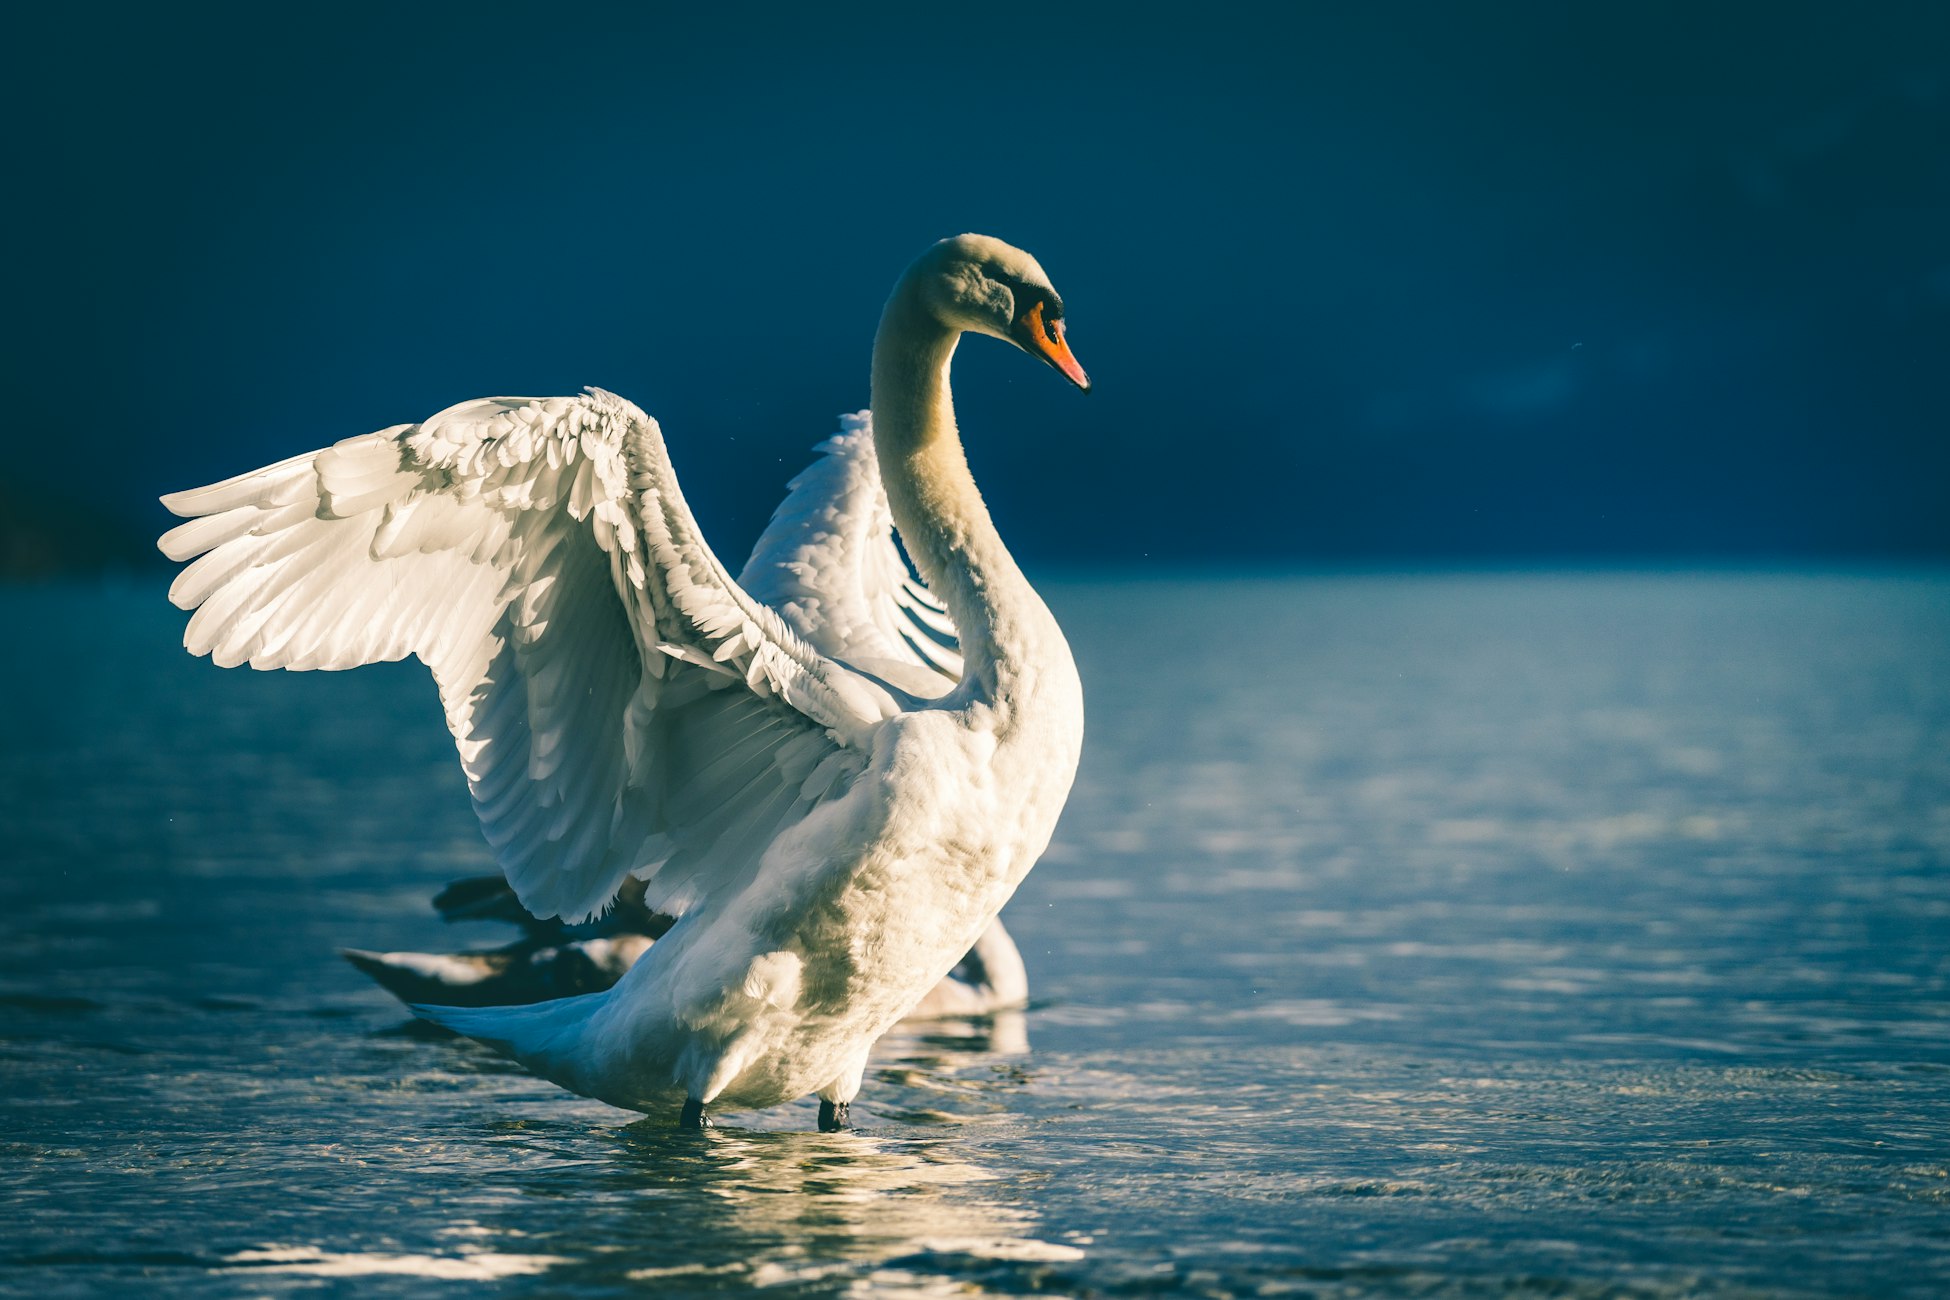 Trumpeter Swan Cygnets Released At Yellowstone To Boost Population